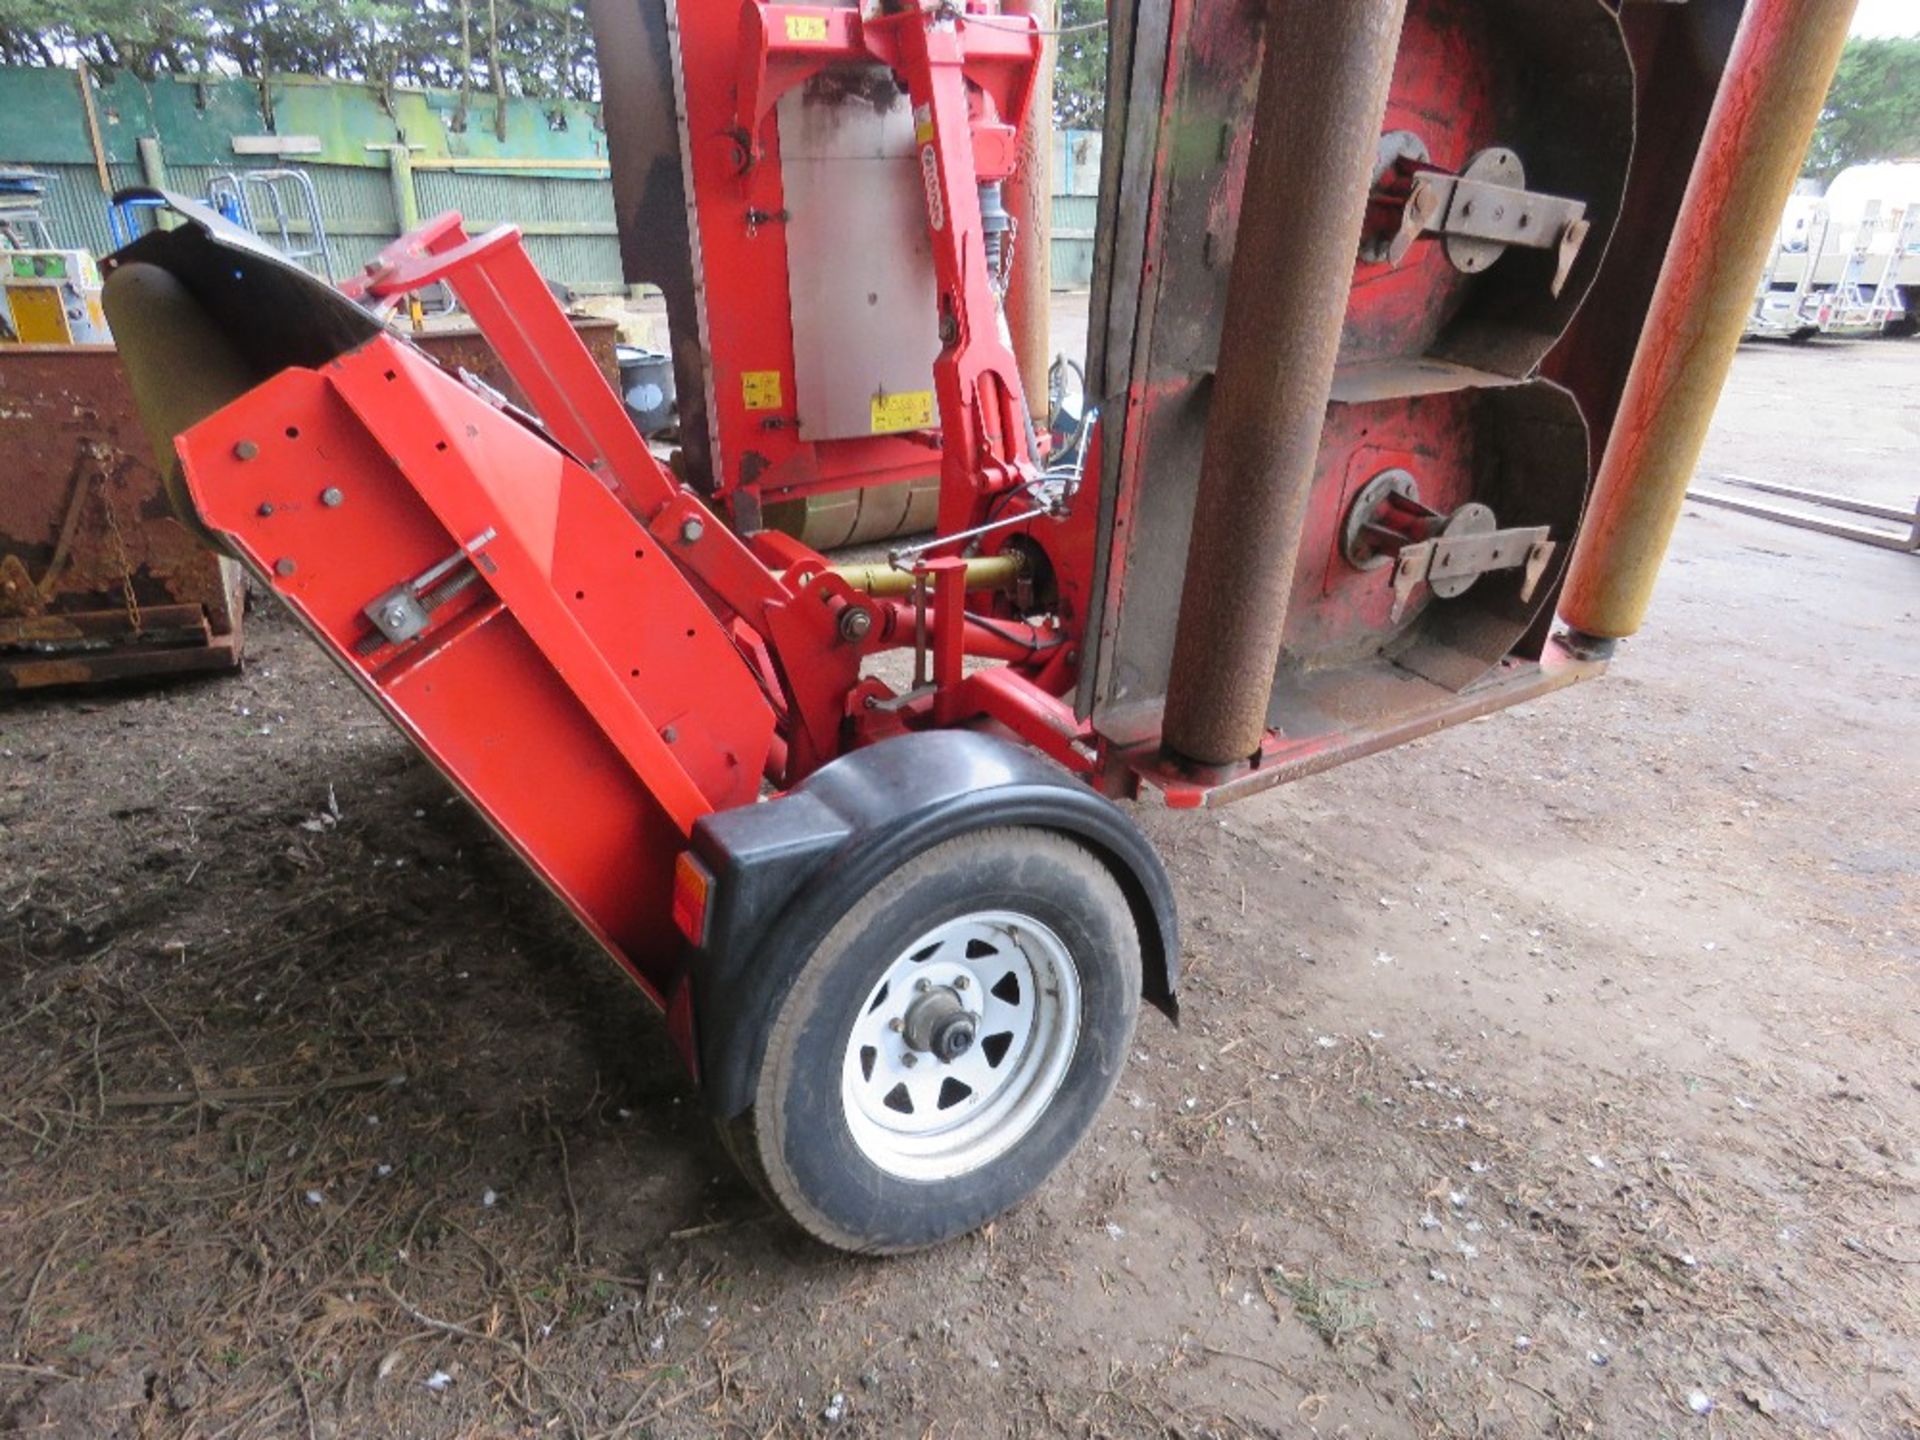 TRIMAX 728-610-400 BATWING TYPE ROLLER MOWER, YEAR 2017. PEGASUS S3 HEADS. NB: REQUIRES REPAIR TO CH - Image 3 of 14